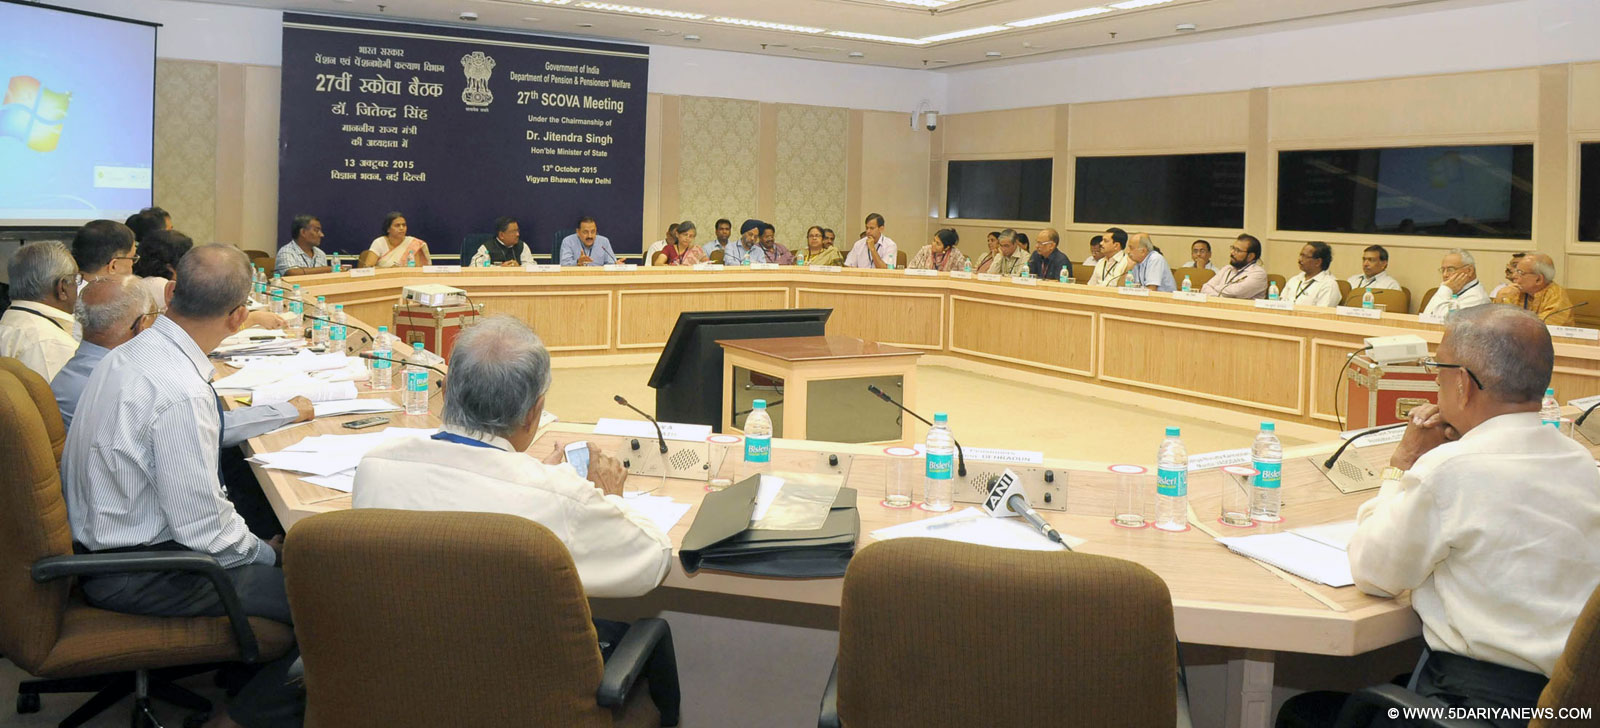 Dr. Jitendra Singh chairing the 27th meeting of the Standing Committee of Voluntary Agencies (SCOVA), in New Delhi on October 13, 2015.